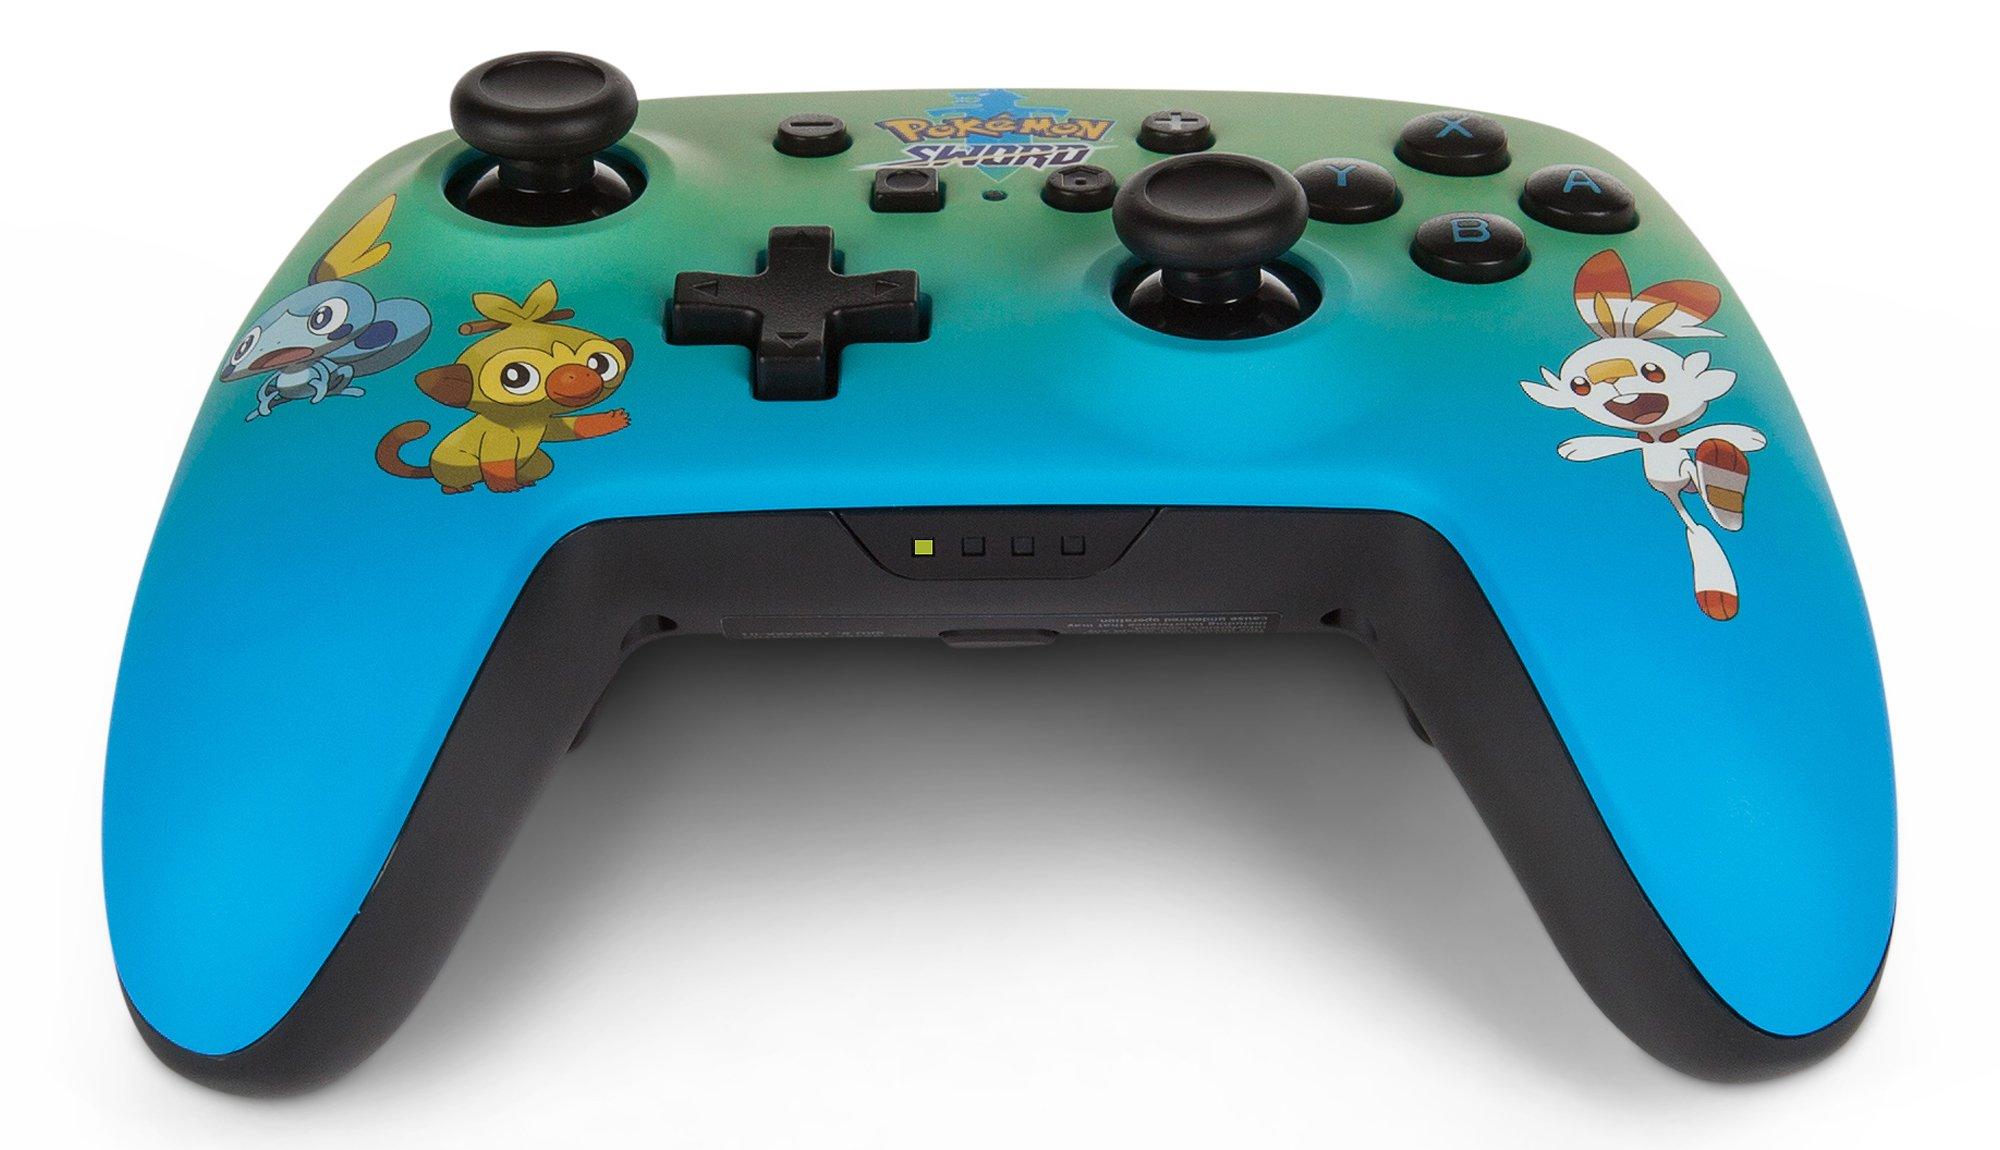 can you play pokemon sword and shield with a pro controller